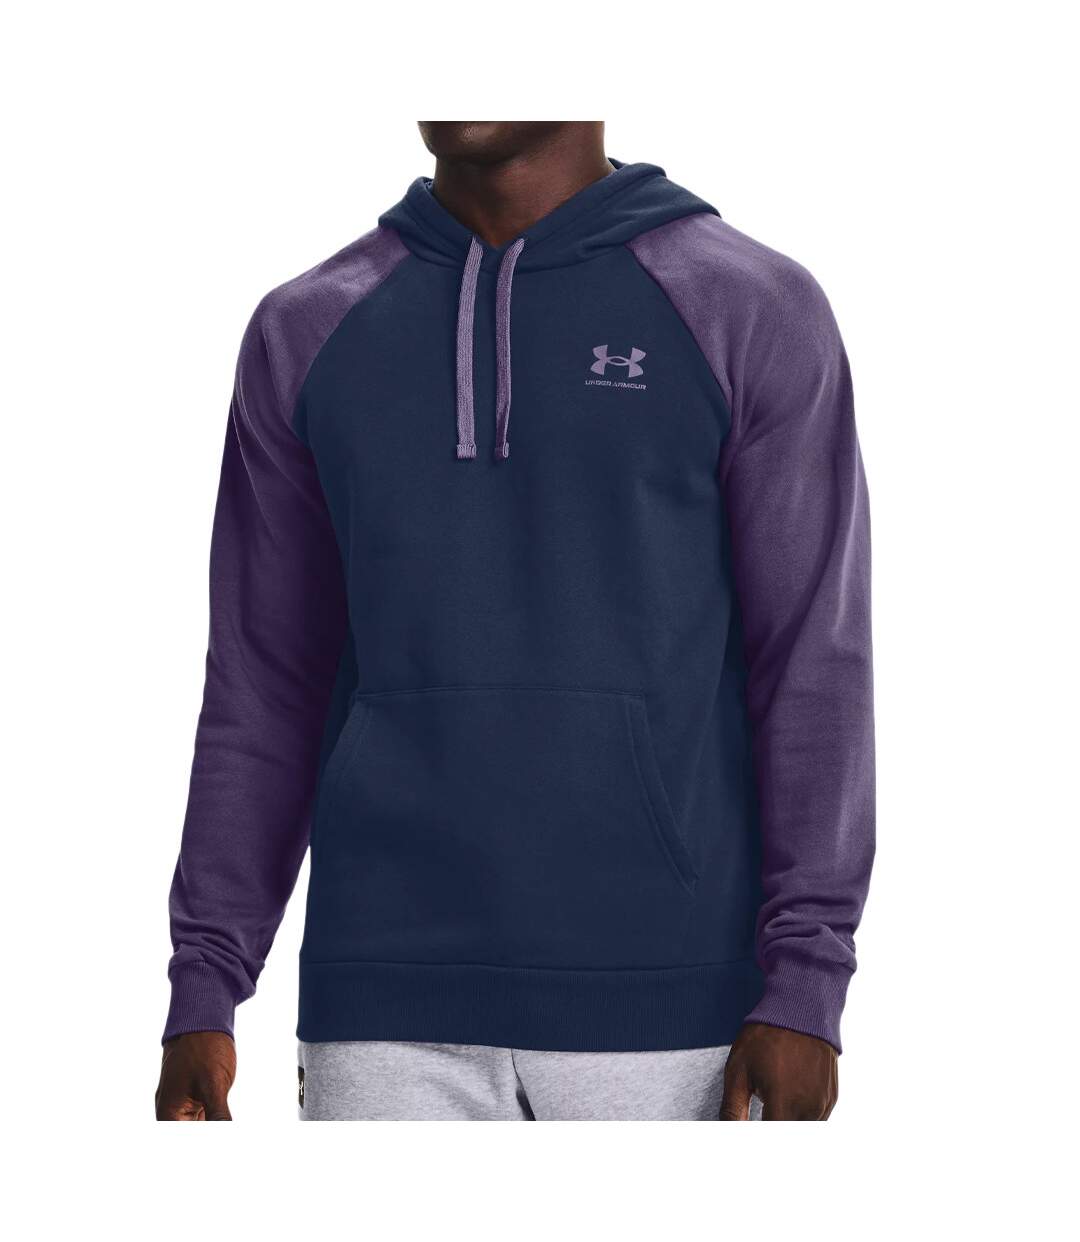 Sweat Marine Homme Under Armour Rival Flc Colorblock